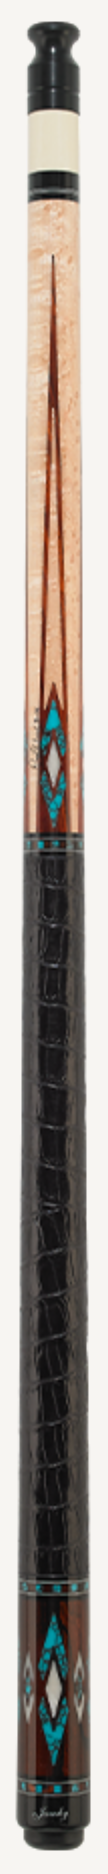 Jacoby JCB05 Pool Cue -Jacoby